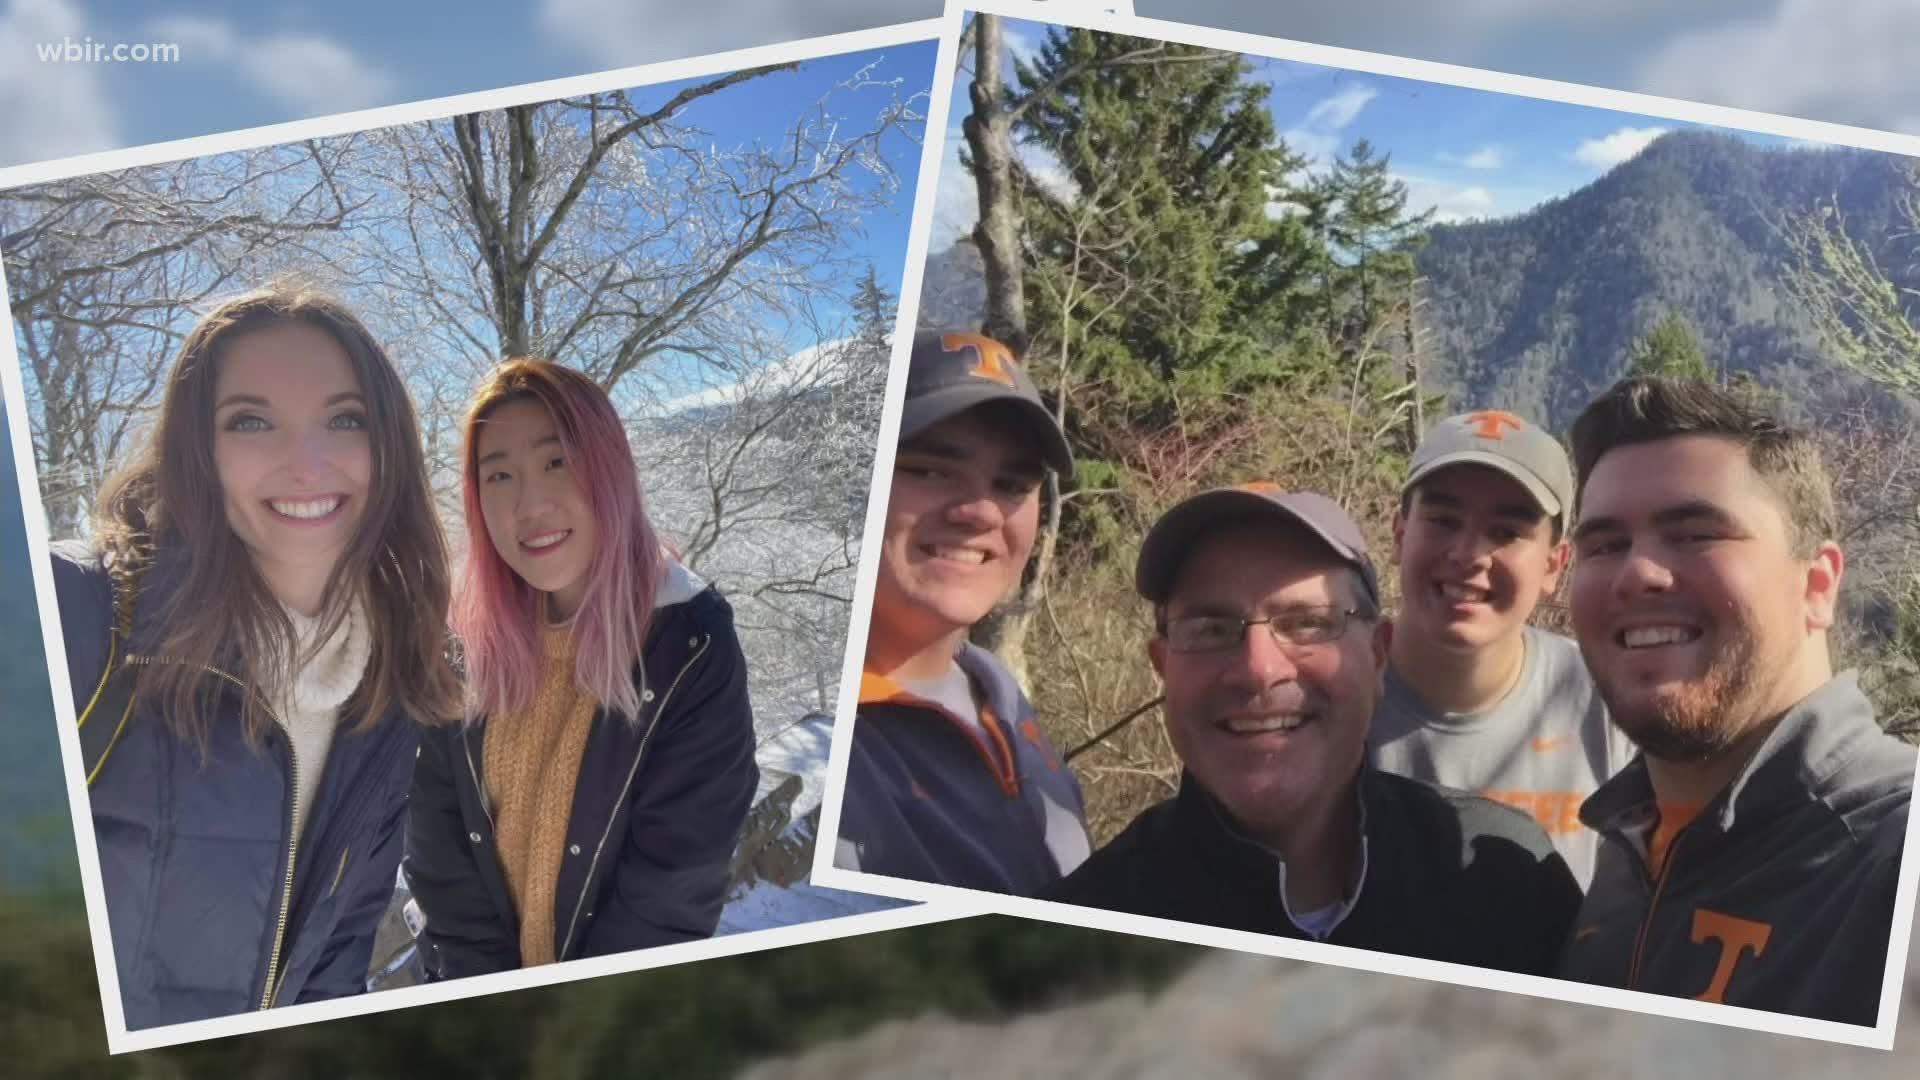 The smoky mountains are breathtaking, perfect for any family photo or even selfies with friends.